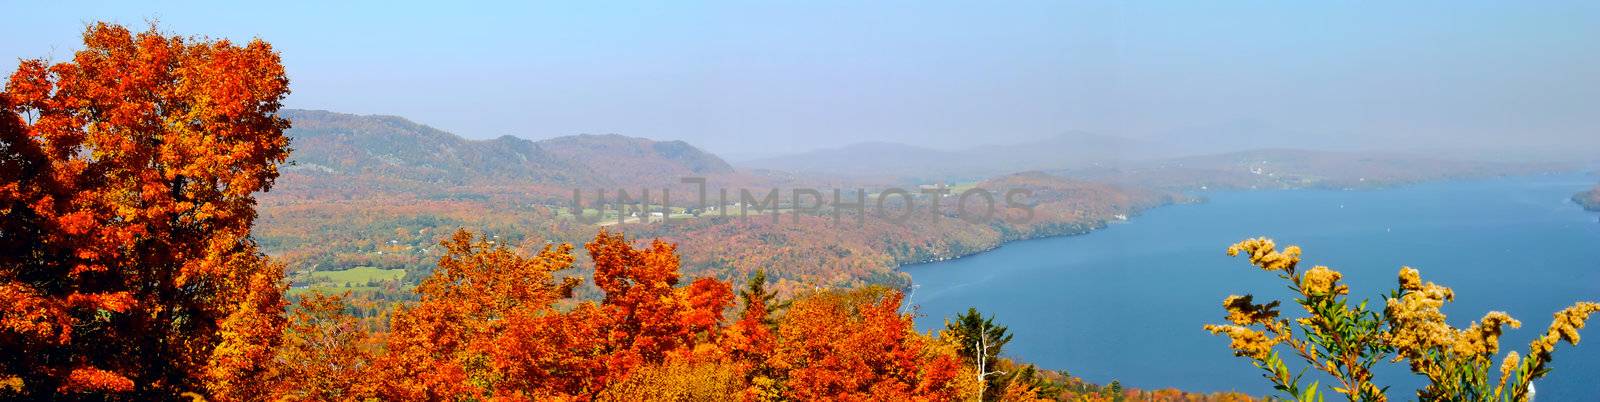 Fall landscape by Talanis